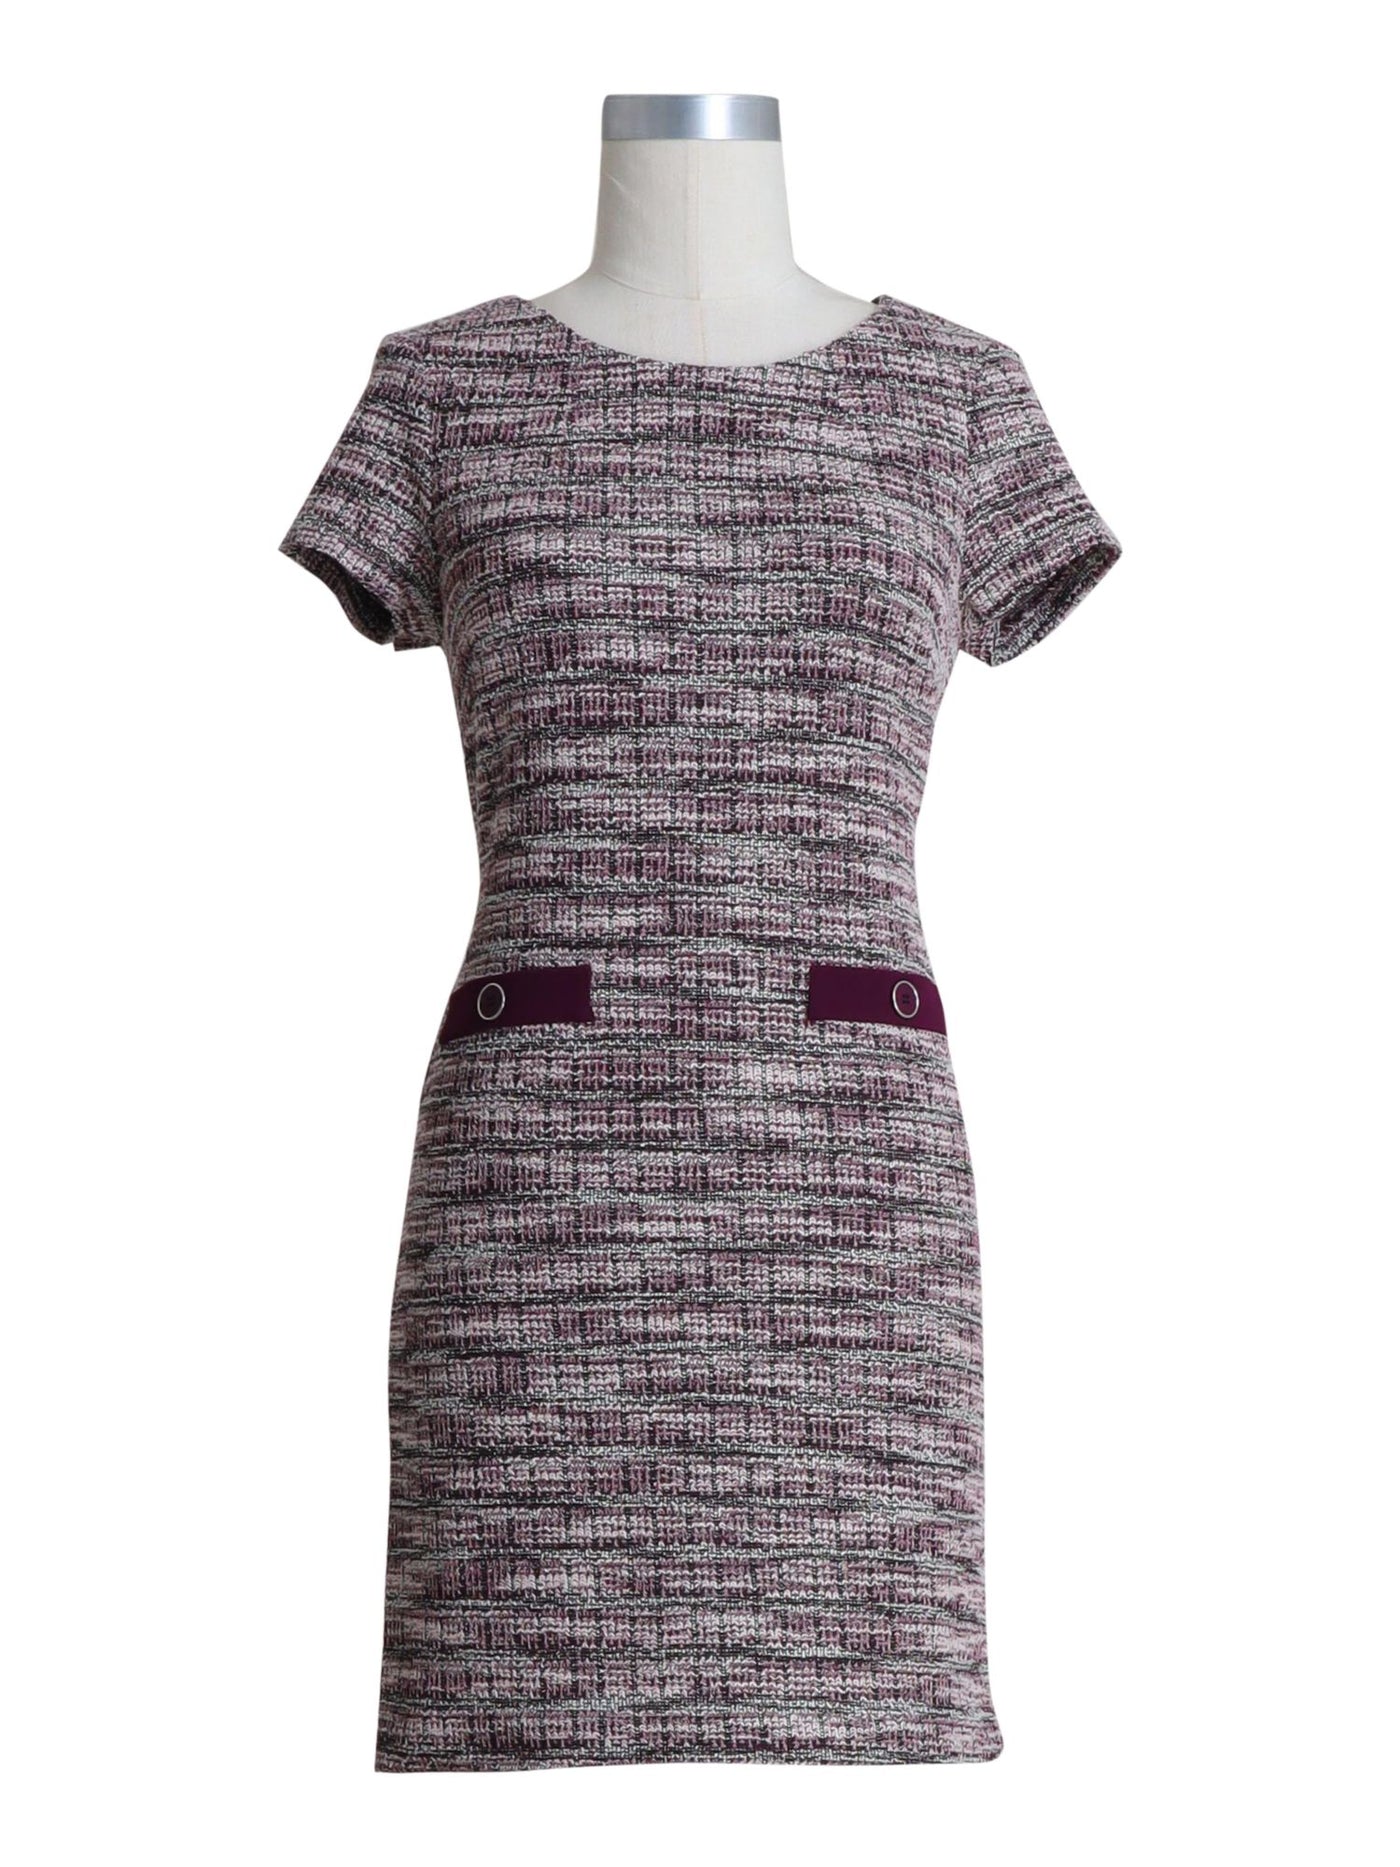 CONNECTED APPAREL Womens Purple Stretch Textured Welt-pocket-detail Tweed Short Sleeve Round Neck Above The Knee Wear To Work Sheath Dress Plus 24W